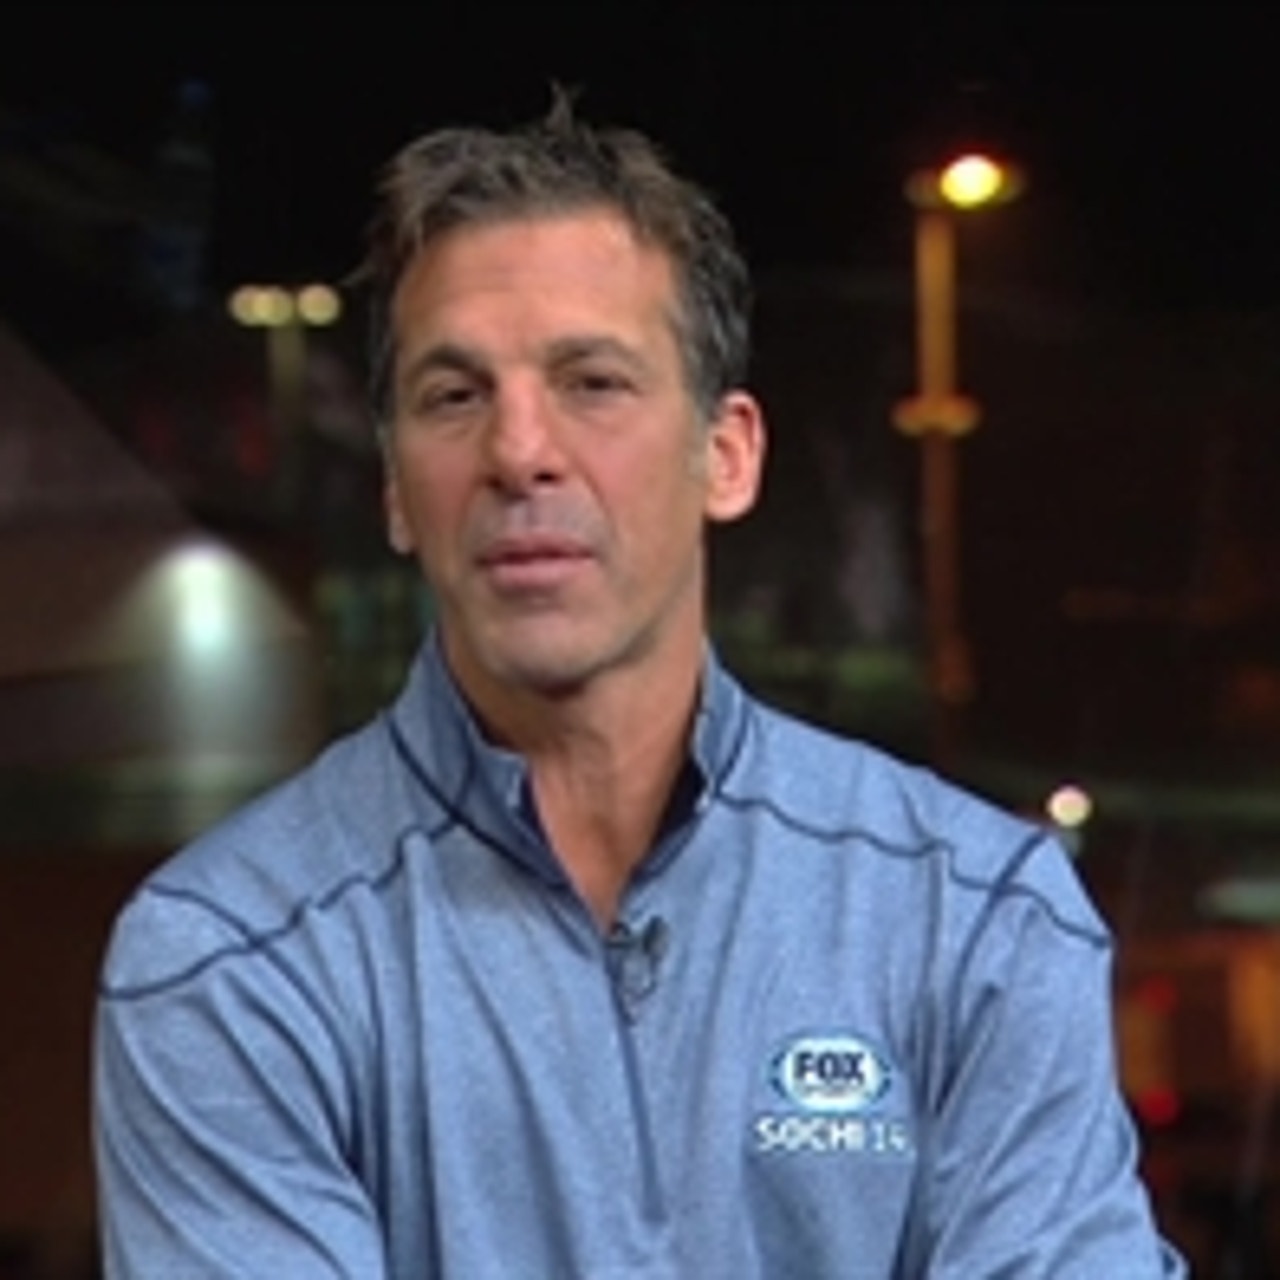 Chris Chelios joins the Jim Bob Show to talk BEARS and the BIG